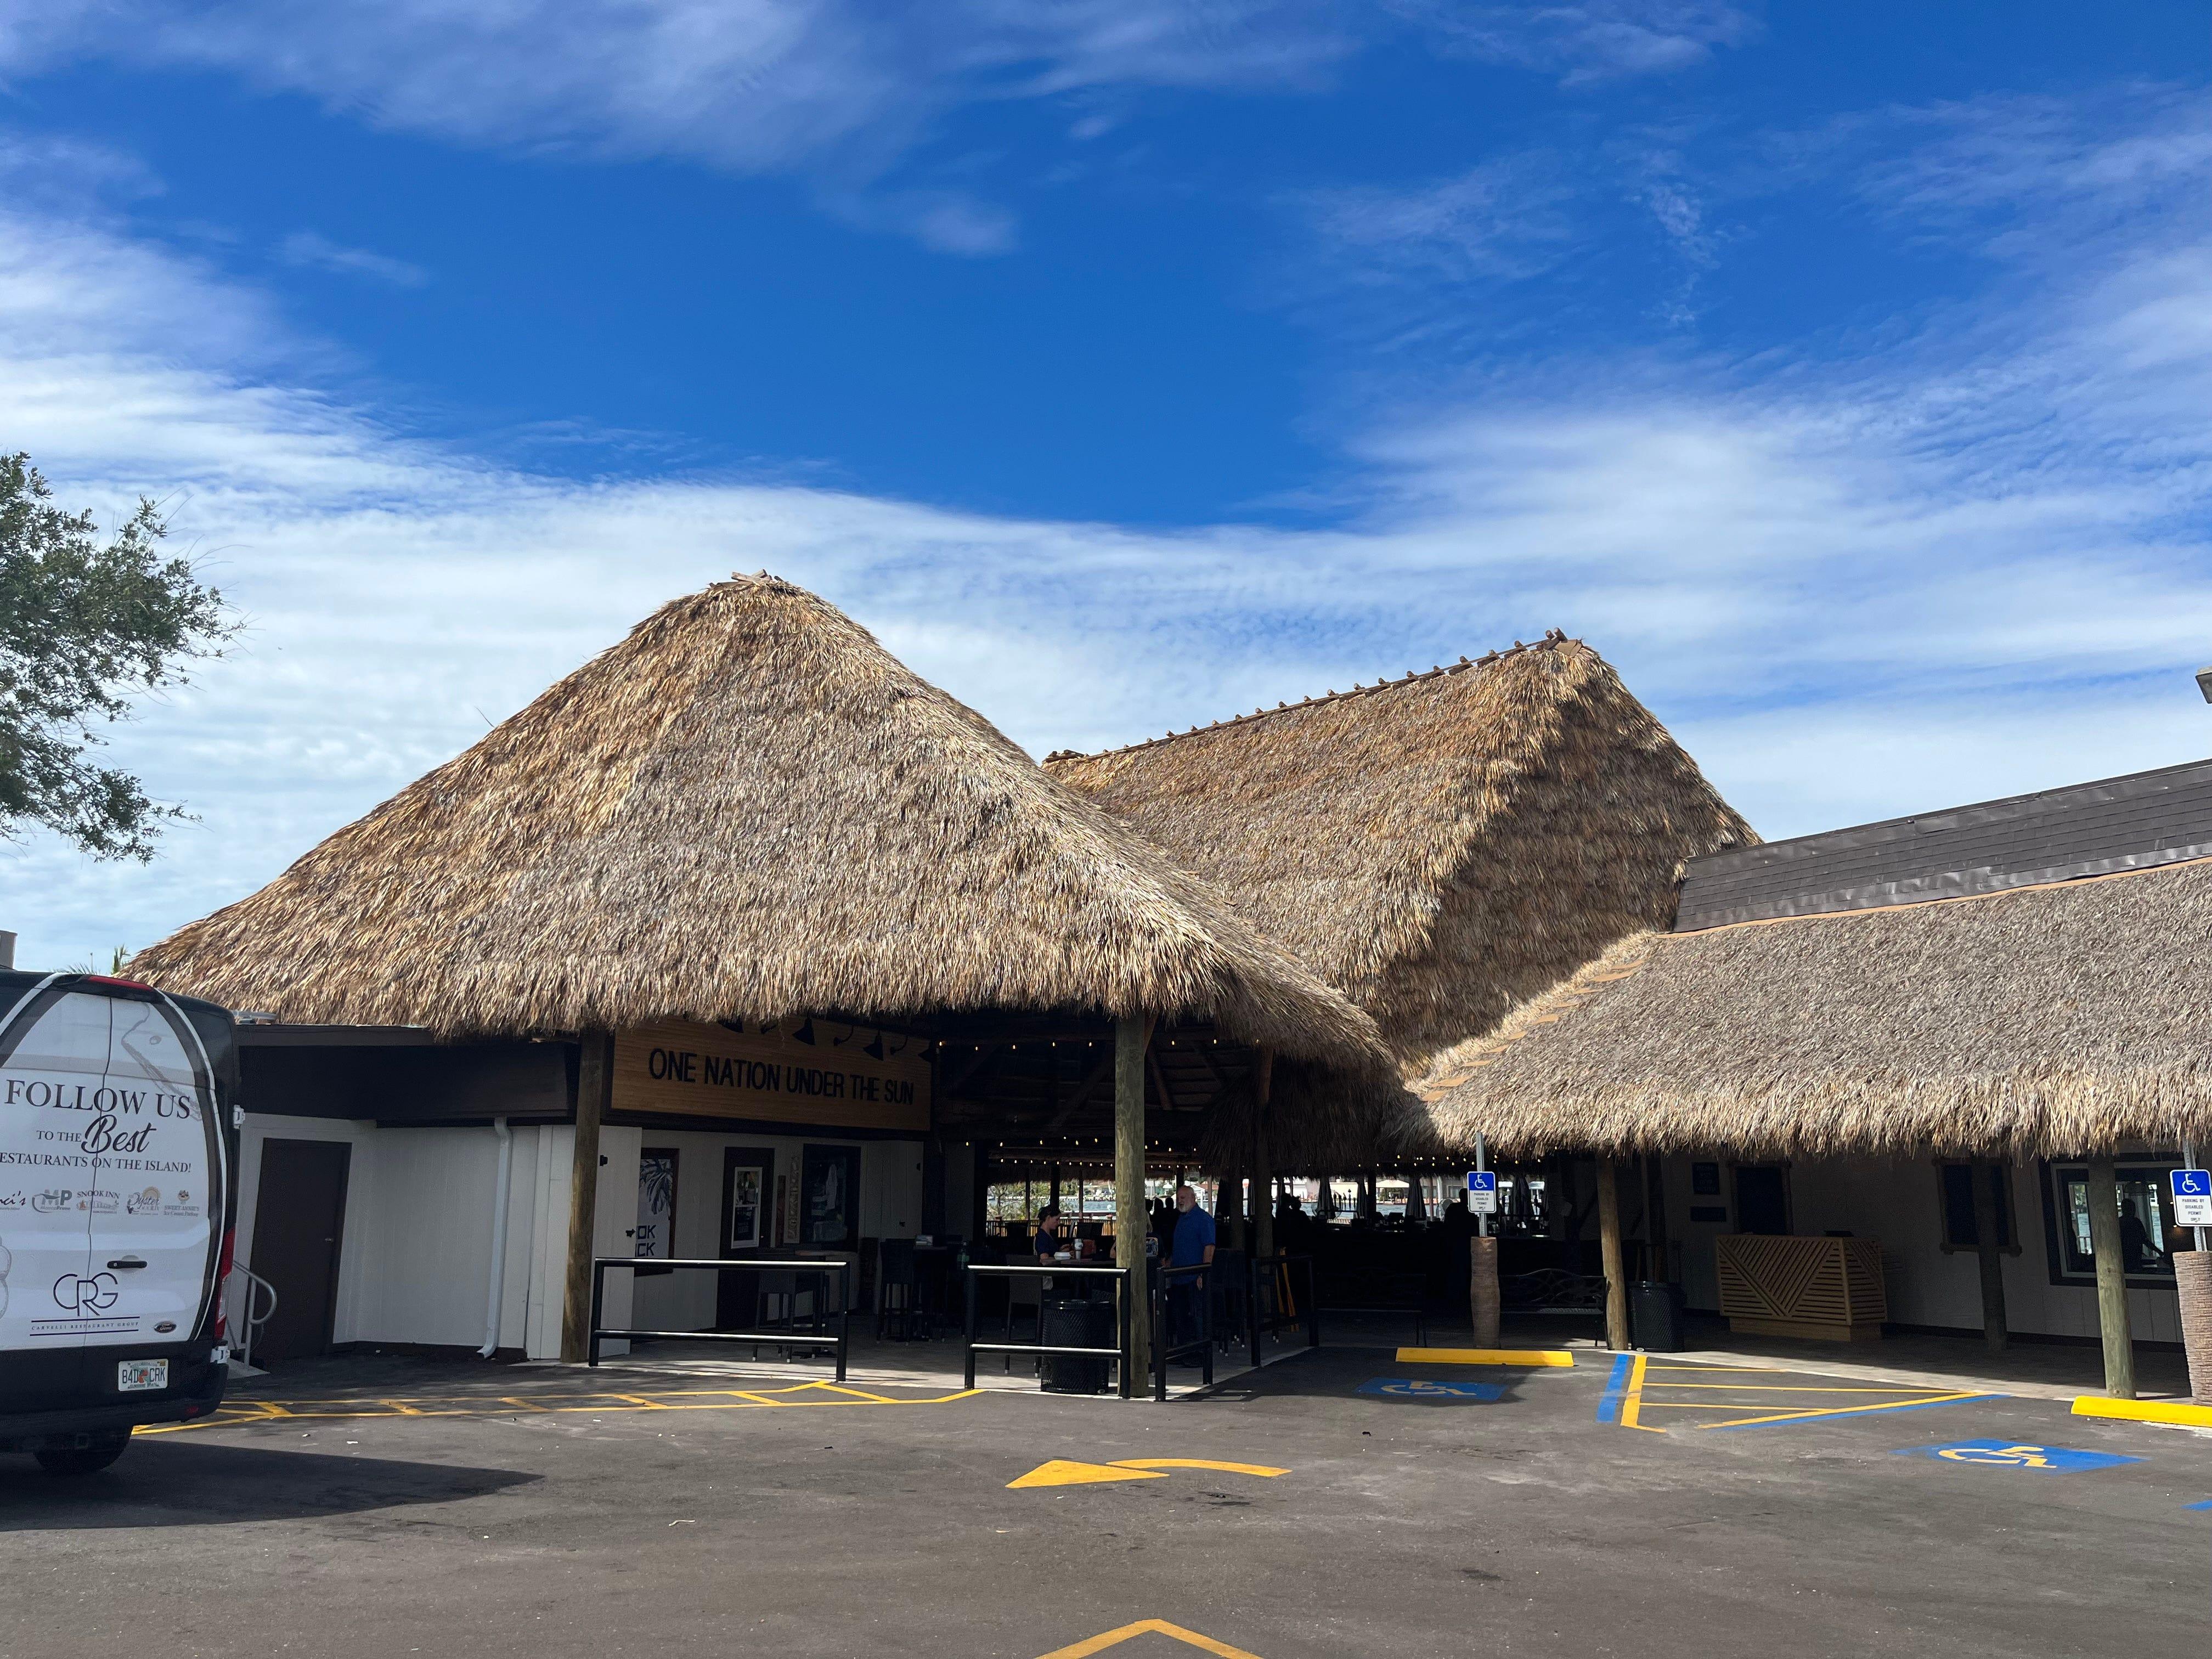 Snook Inn reopened on Marco Island today after a year. The restaurant closed Sept. 12, 2022, to replace its Chickee - a shelter with a thatched roof. Hurricane Ian hit on Sept. 28, bringing 5 1/2 feet of water inside.